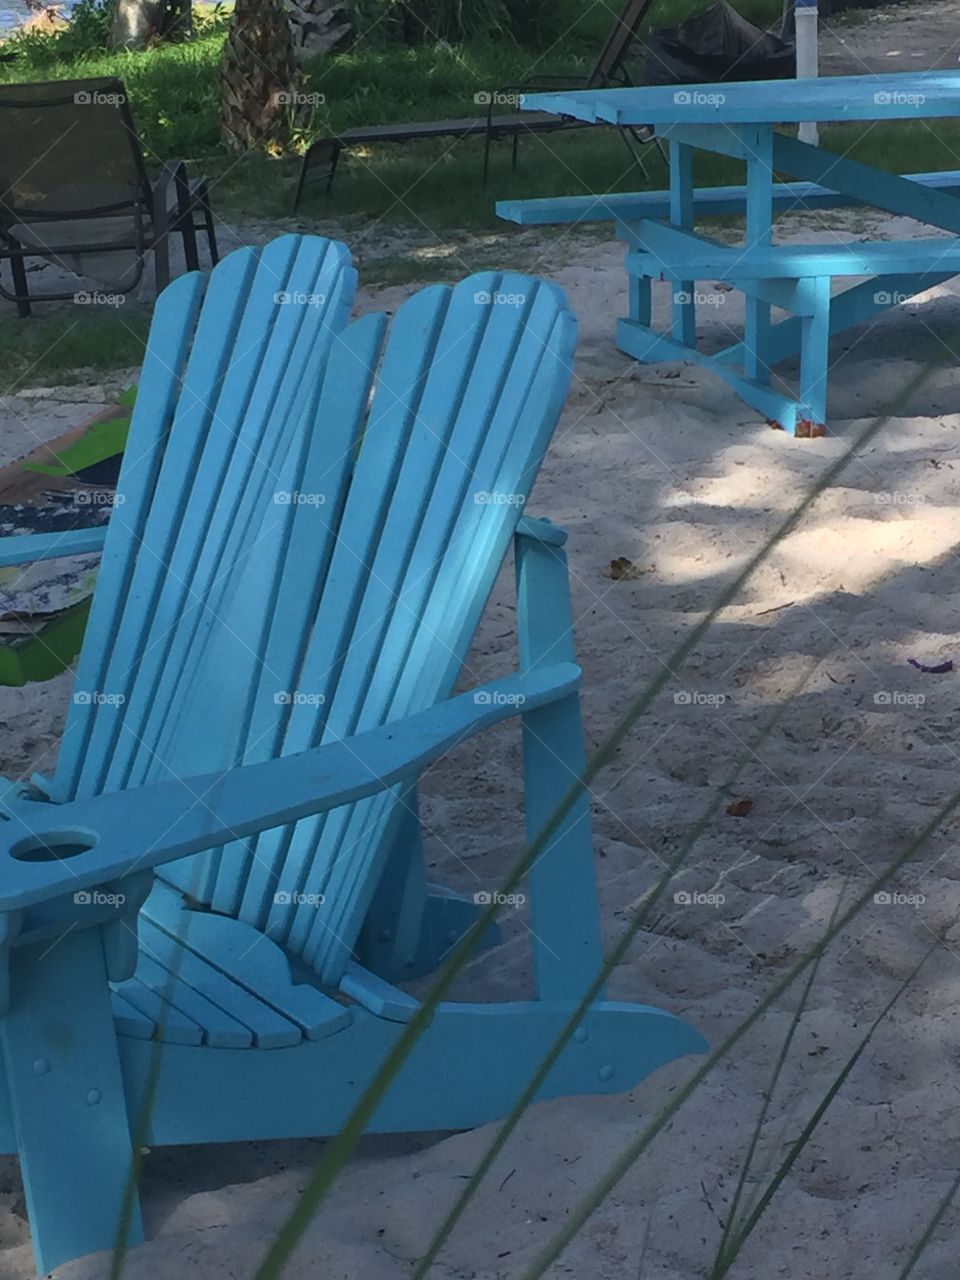 Chair, Seat, Bench, Summer, Dug Out Pool